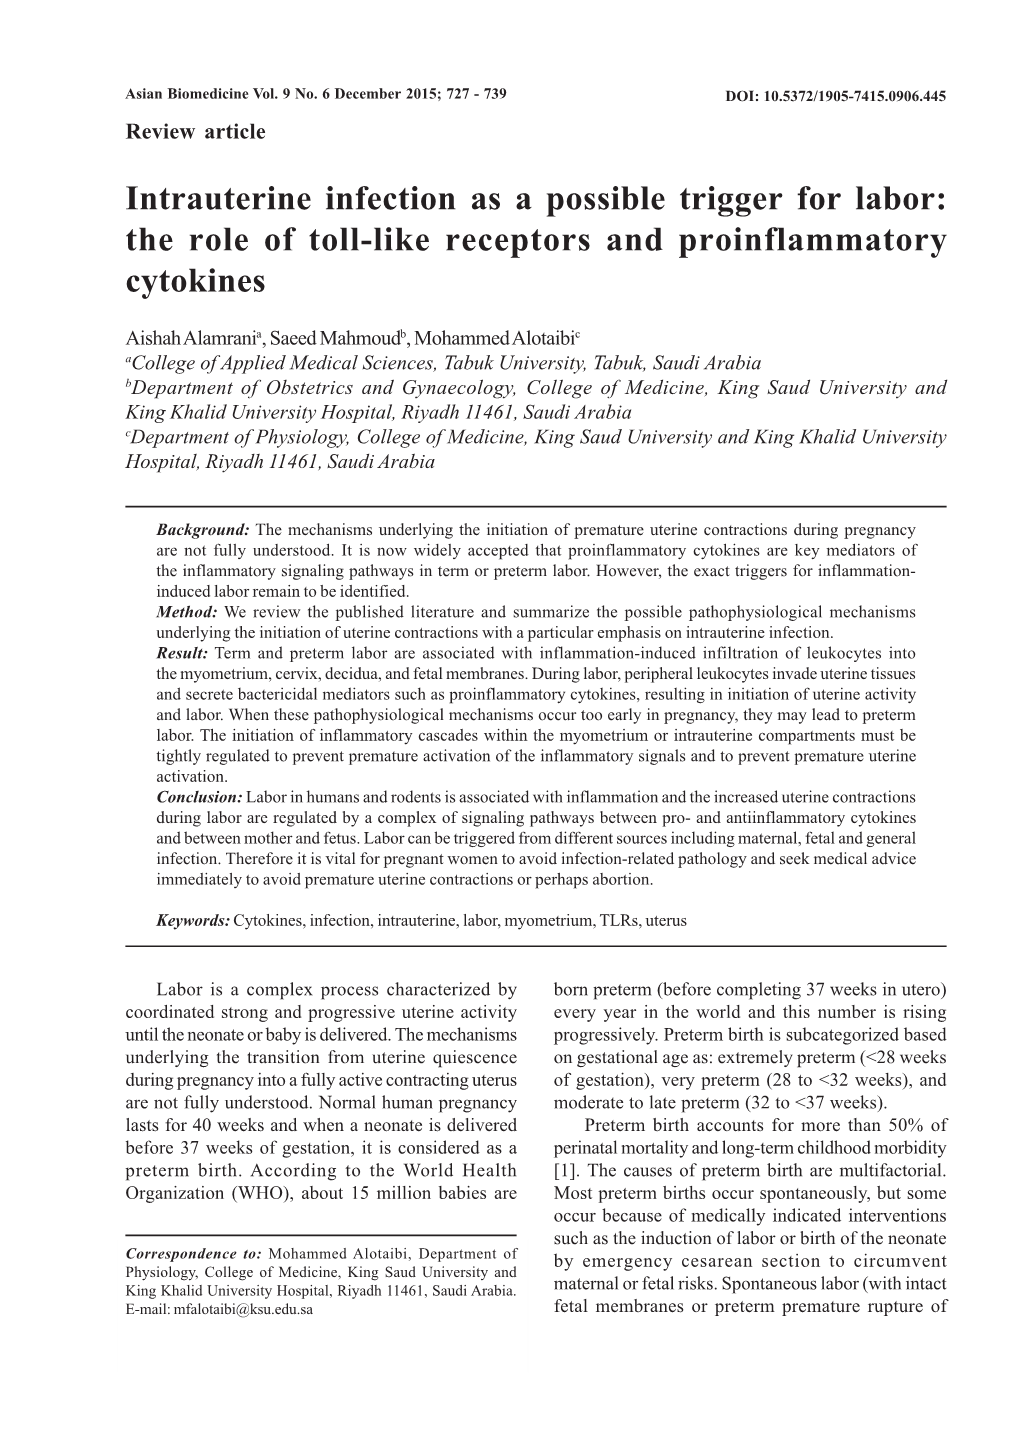 Intrauterine Infection As a Possible Trigger for Labor: the Role of Toll-Like Receptors and Proinflammatory Cytokines